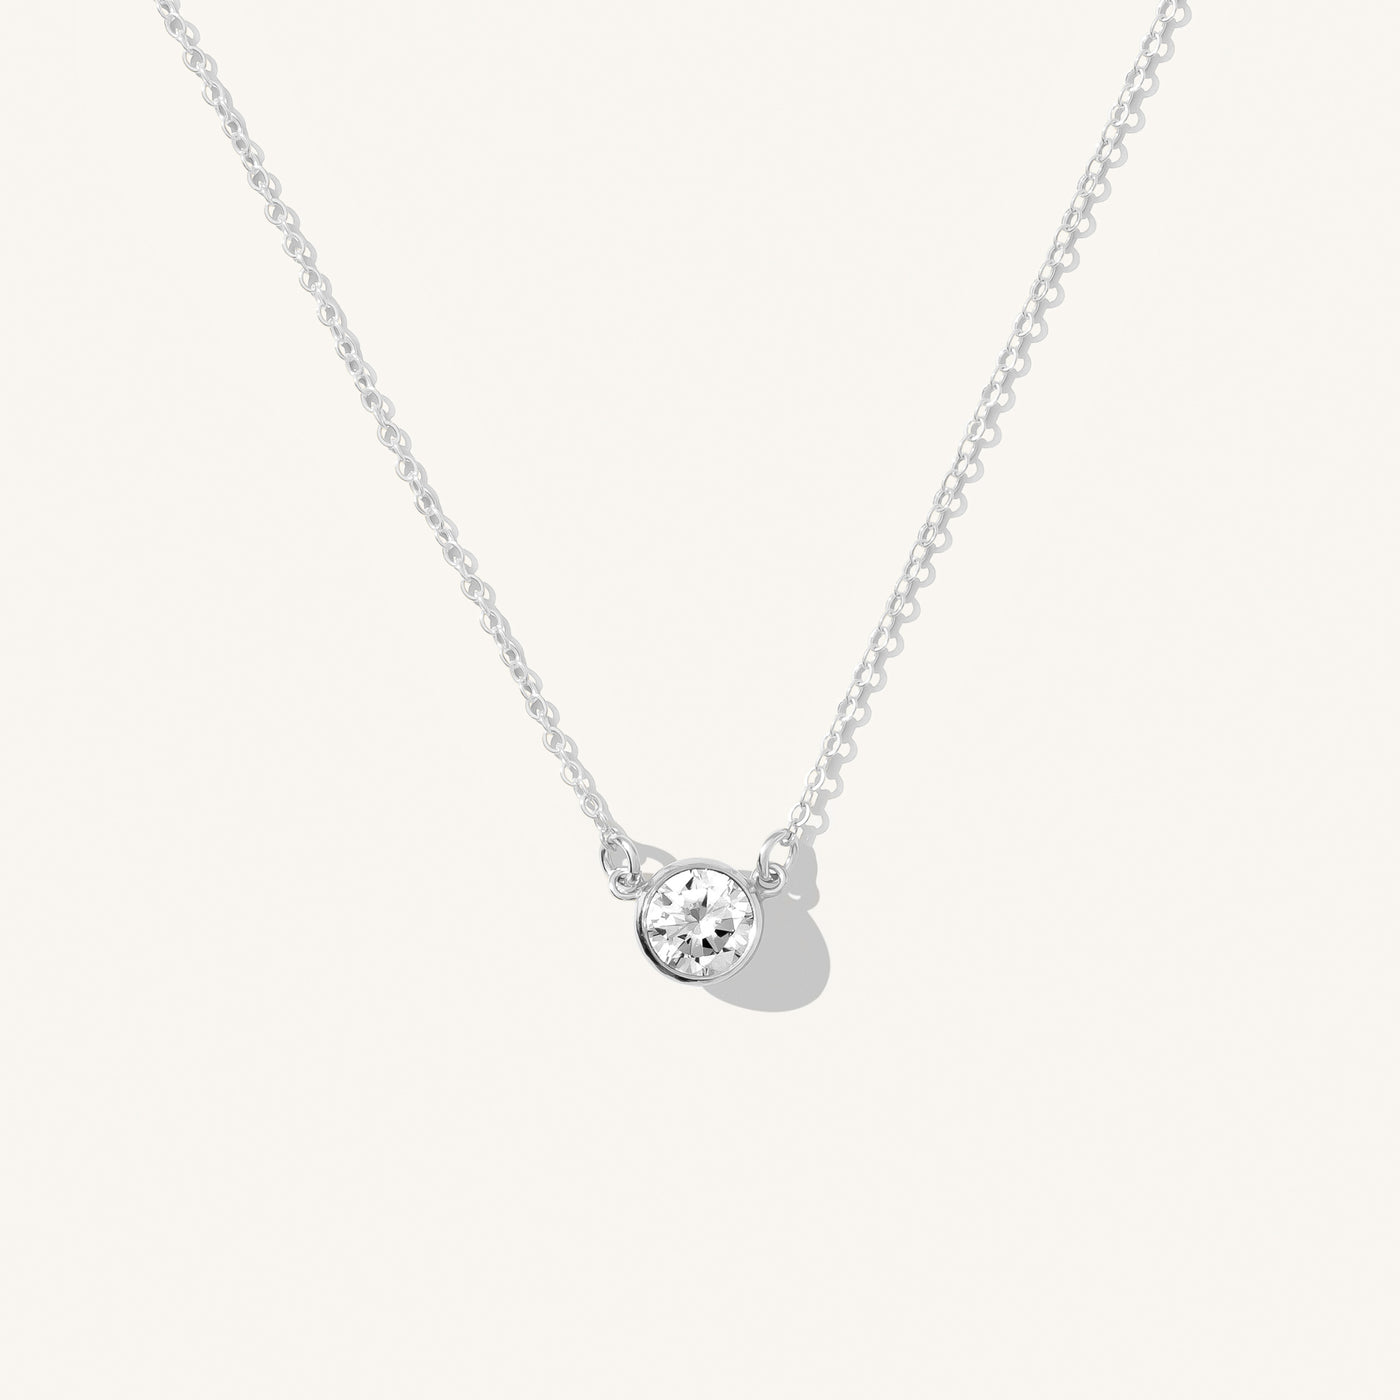 Solitaire Necklace | Simple & Dainty Jewelry